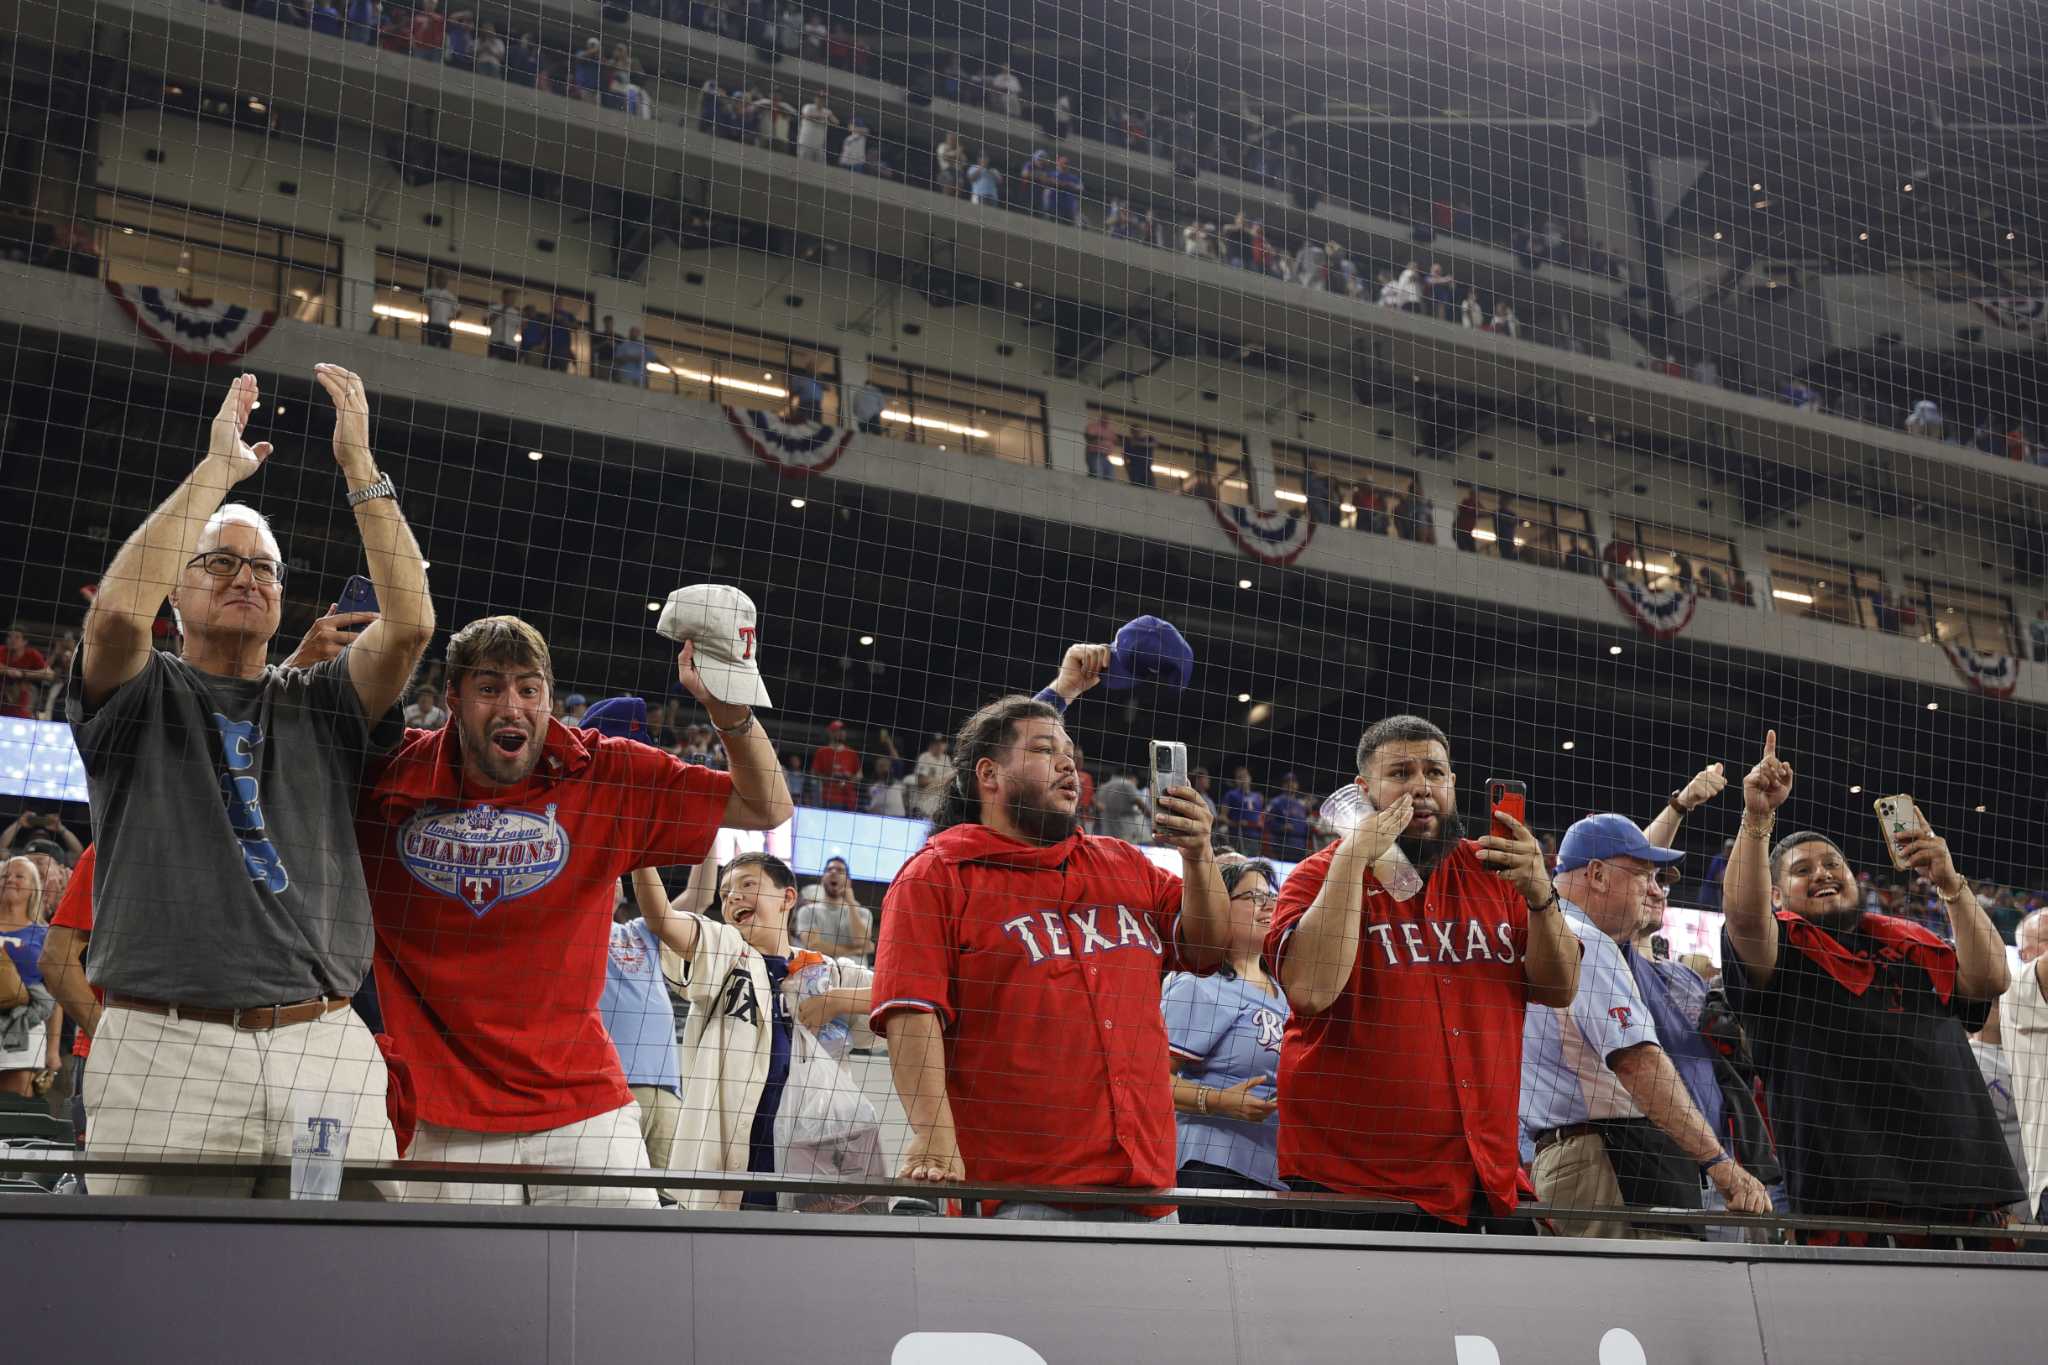 No place like home: Texas Rangers fans hopeful for ALCS sweep